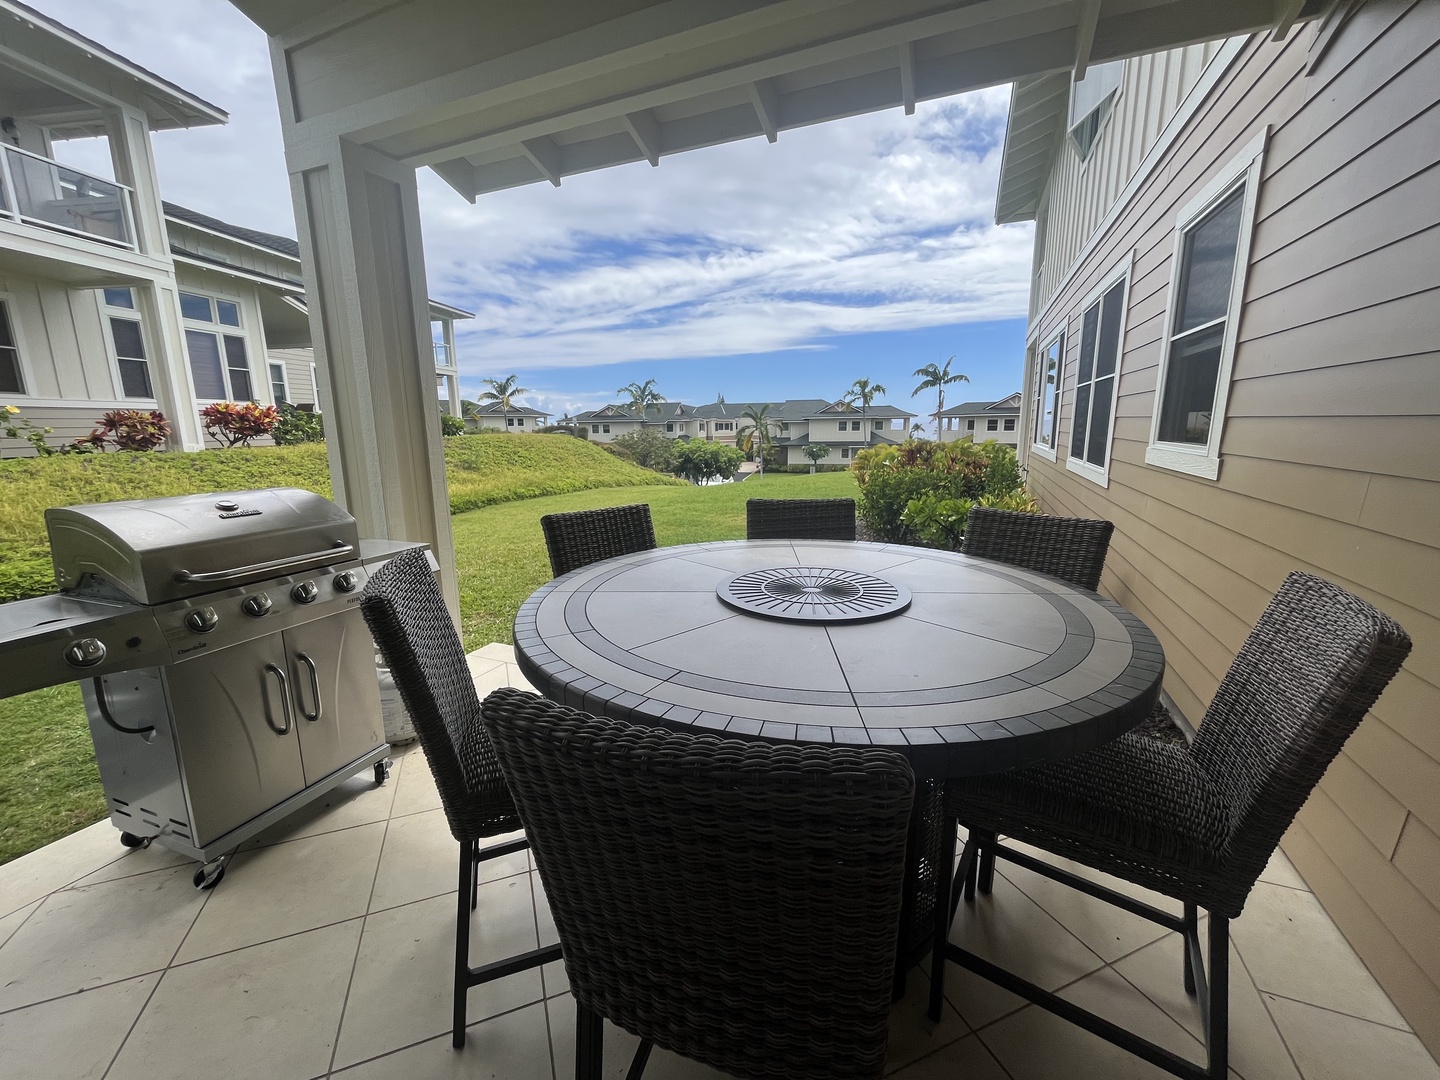 Lanai dining and propane grill